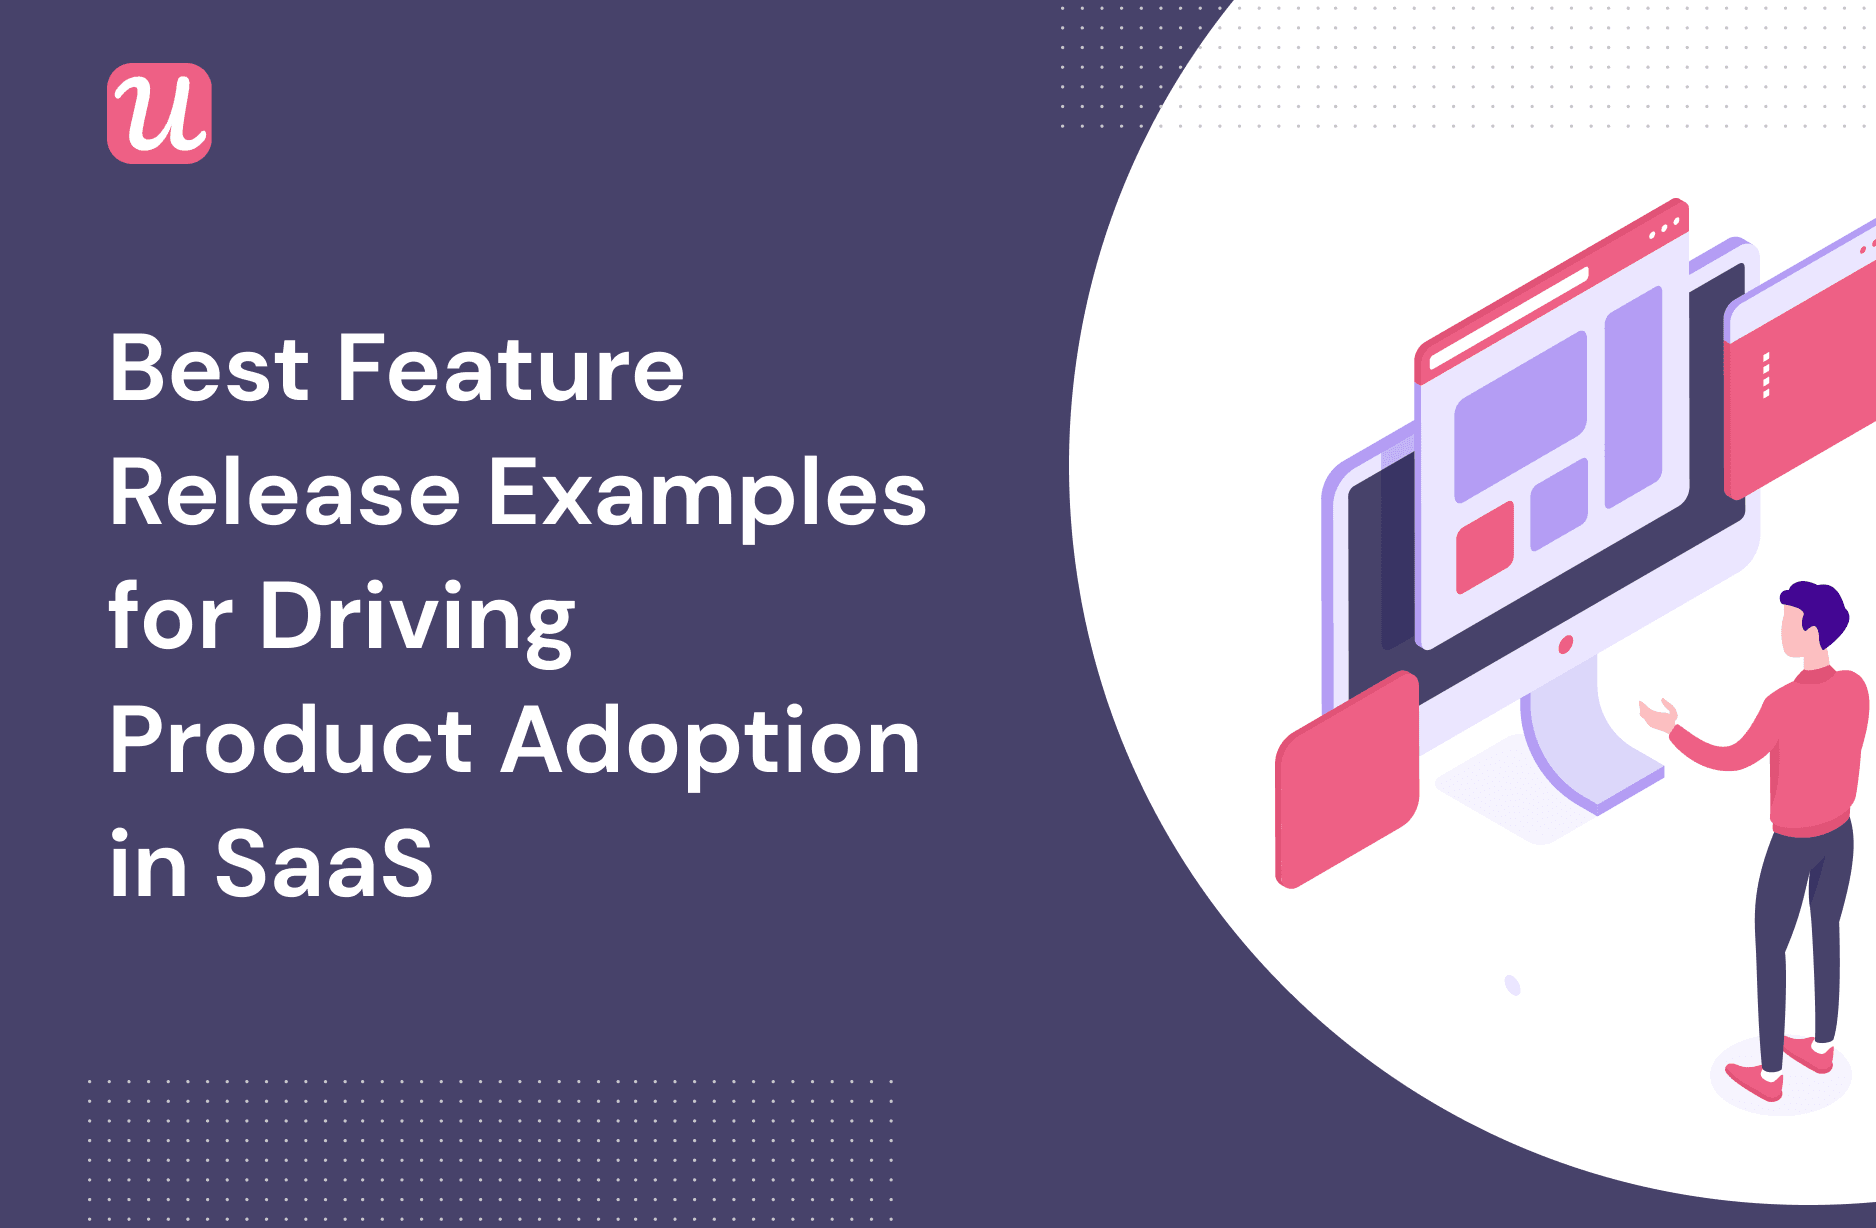 Best Feature Release Example For Driving Product Adoption in SaaS